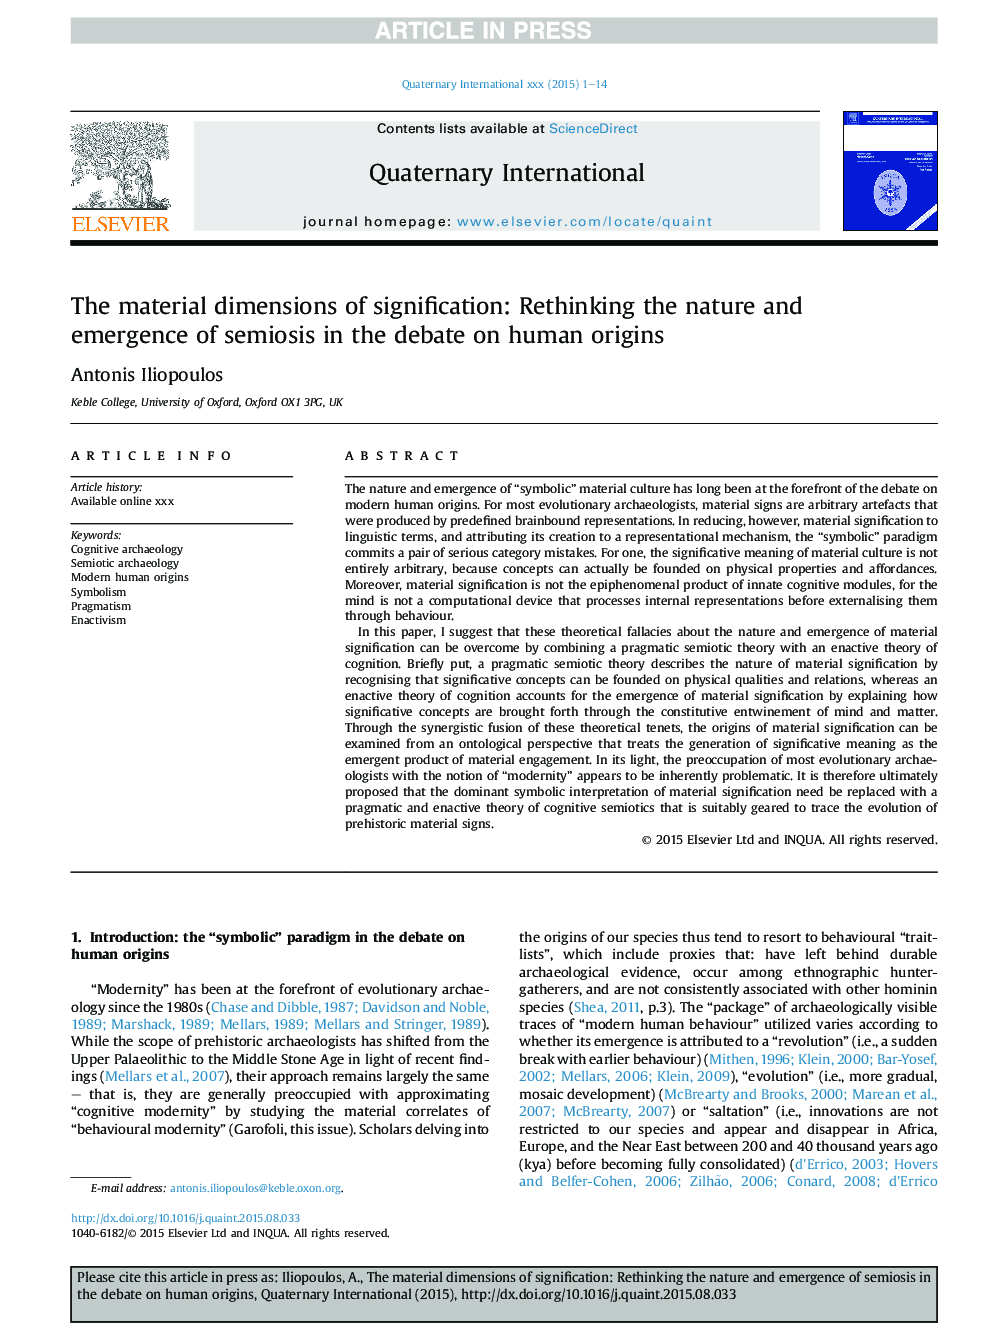 The material dimensions of signification: Rethinking the nature and emergence of semiosis in the debate on human origins